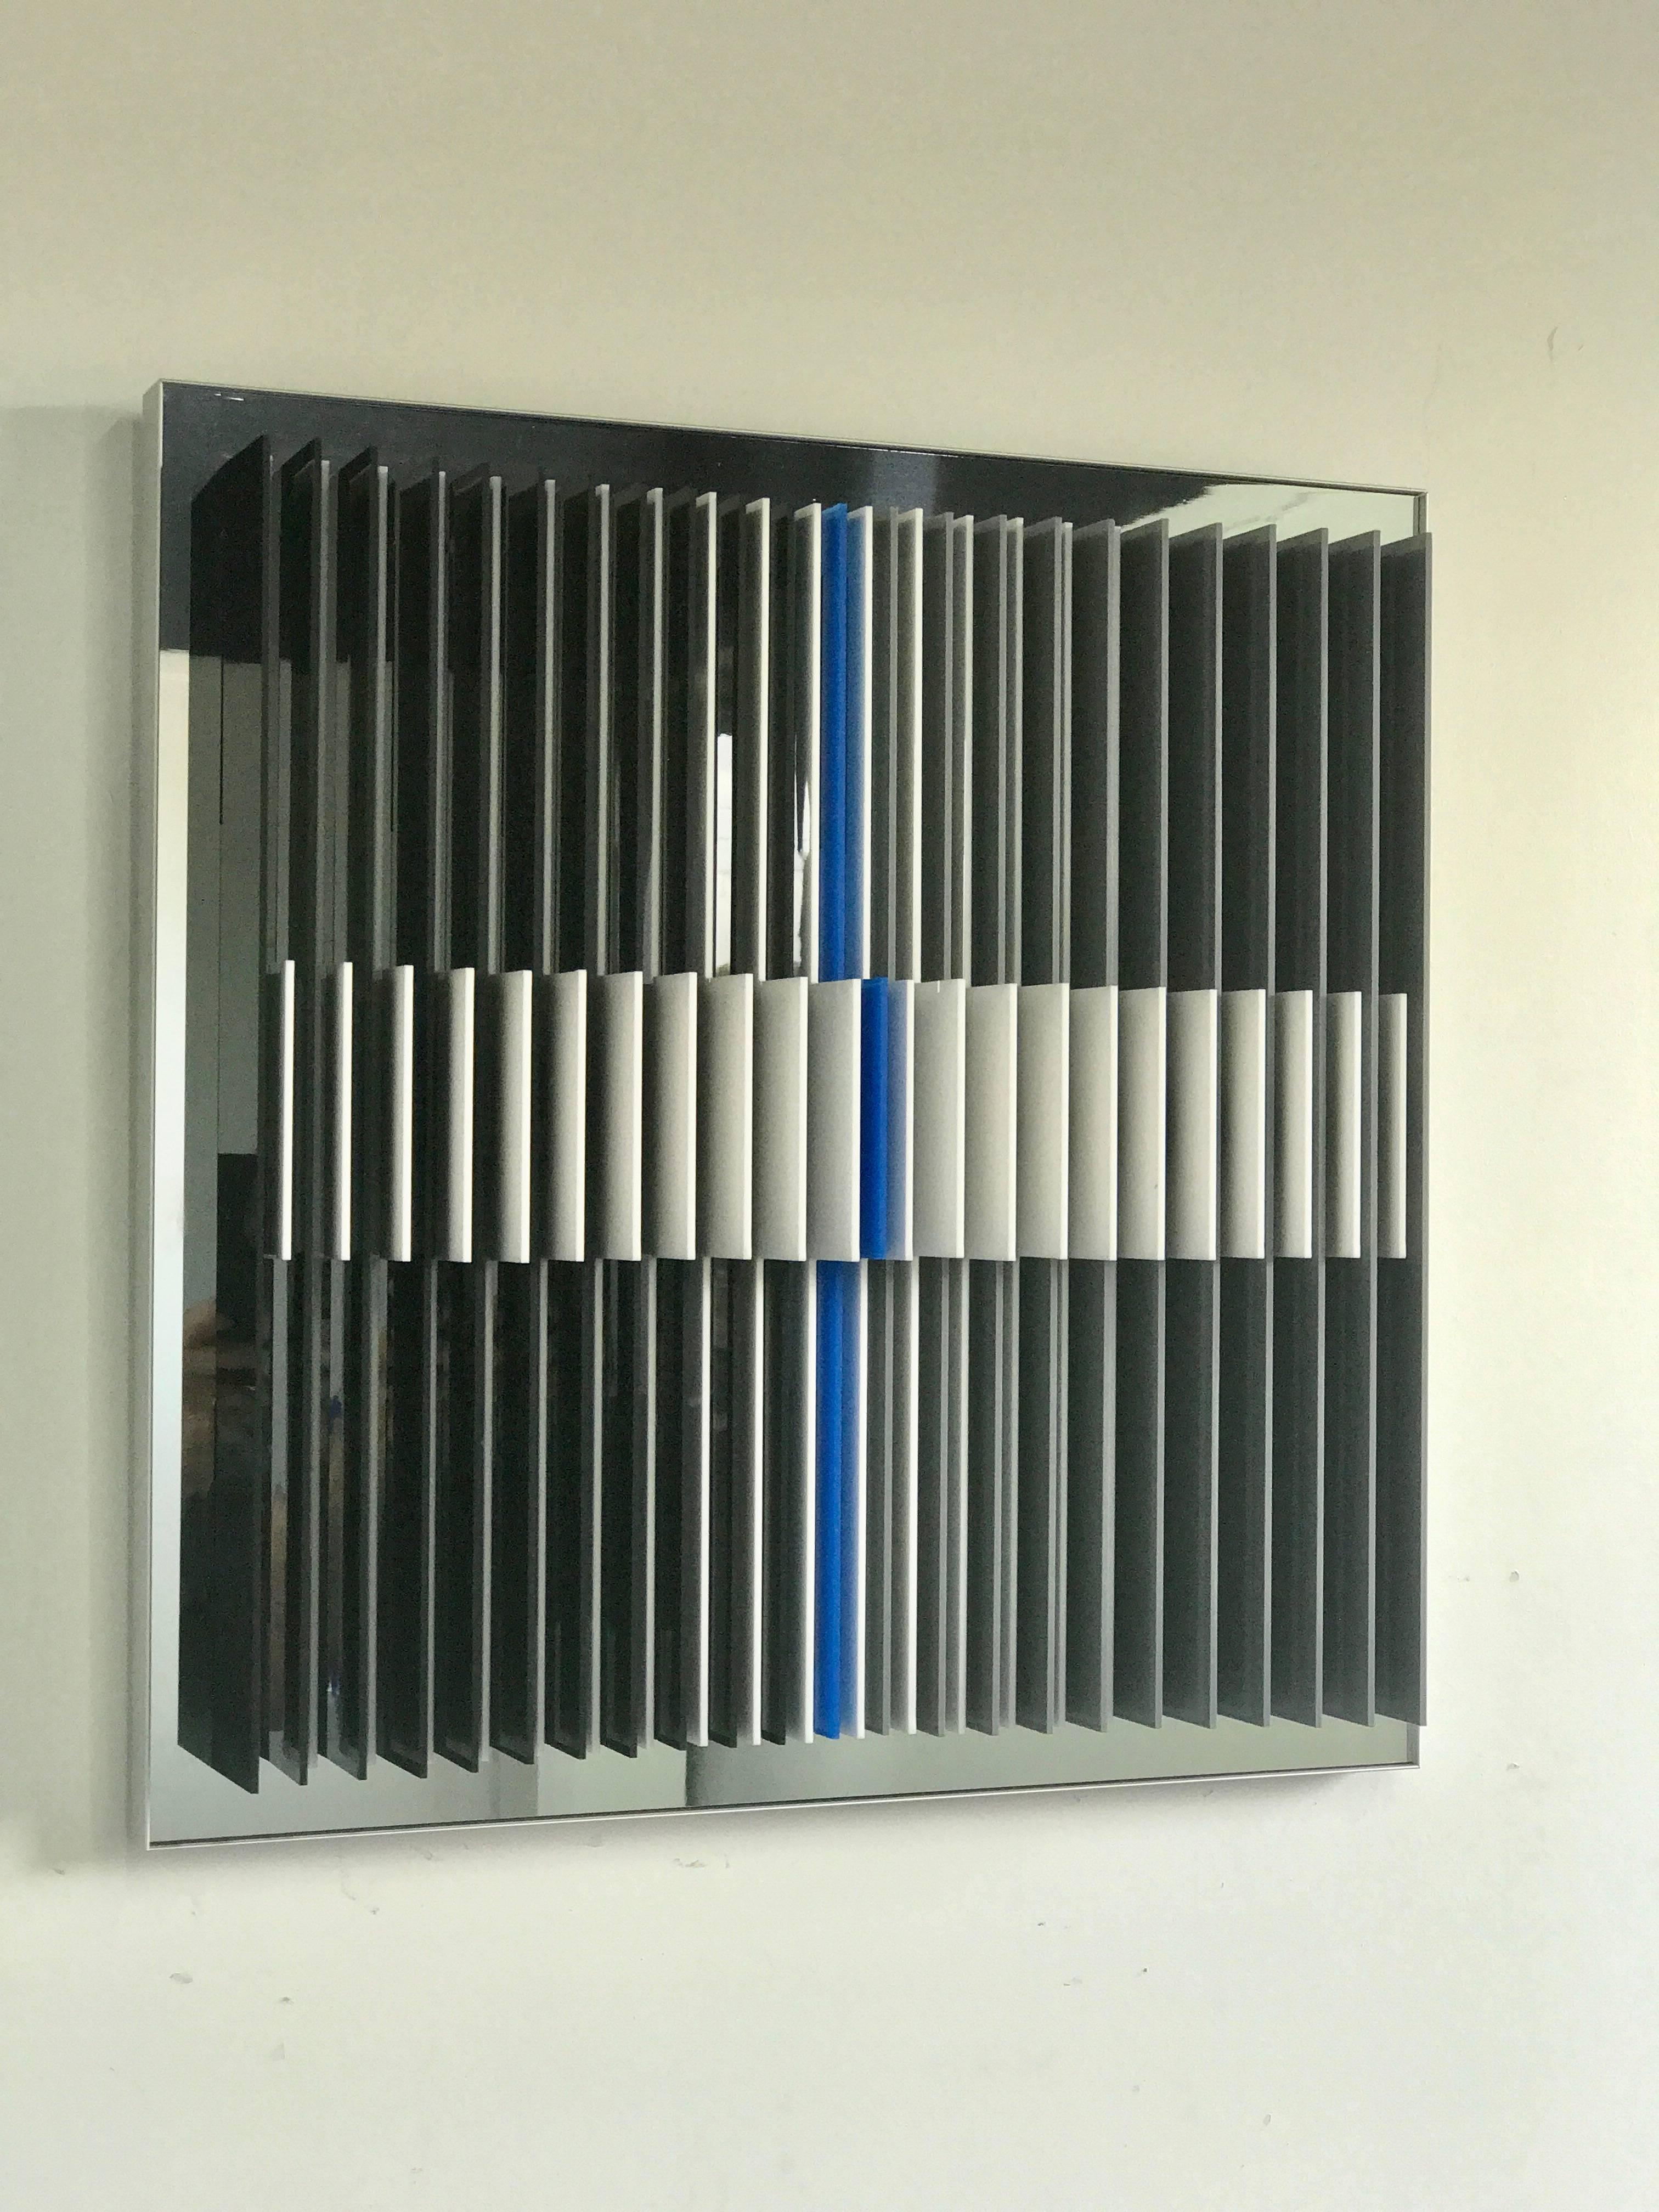 Dichotomic VI - kinetic wall sculpture by J. Margulis